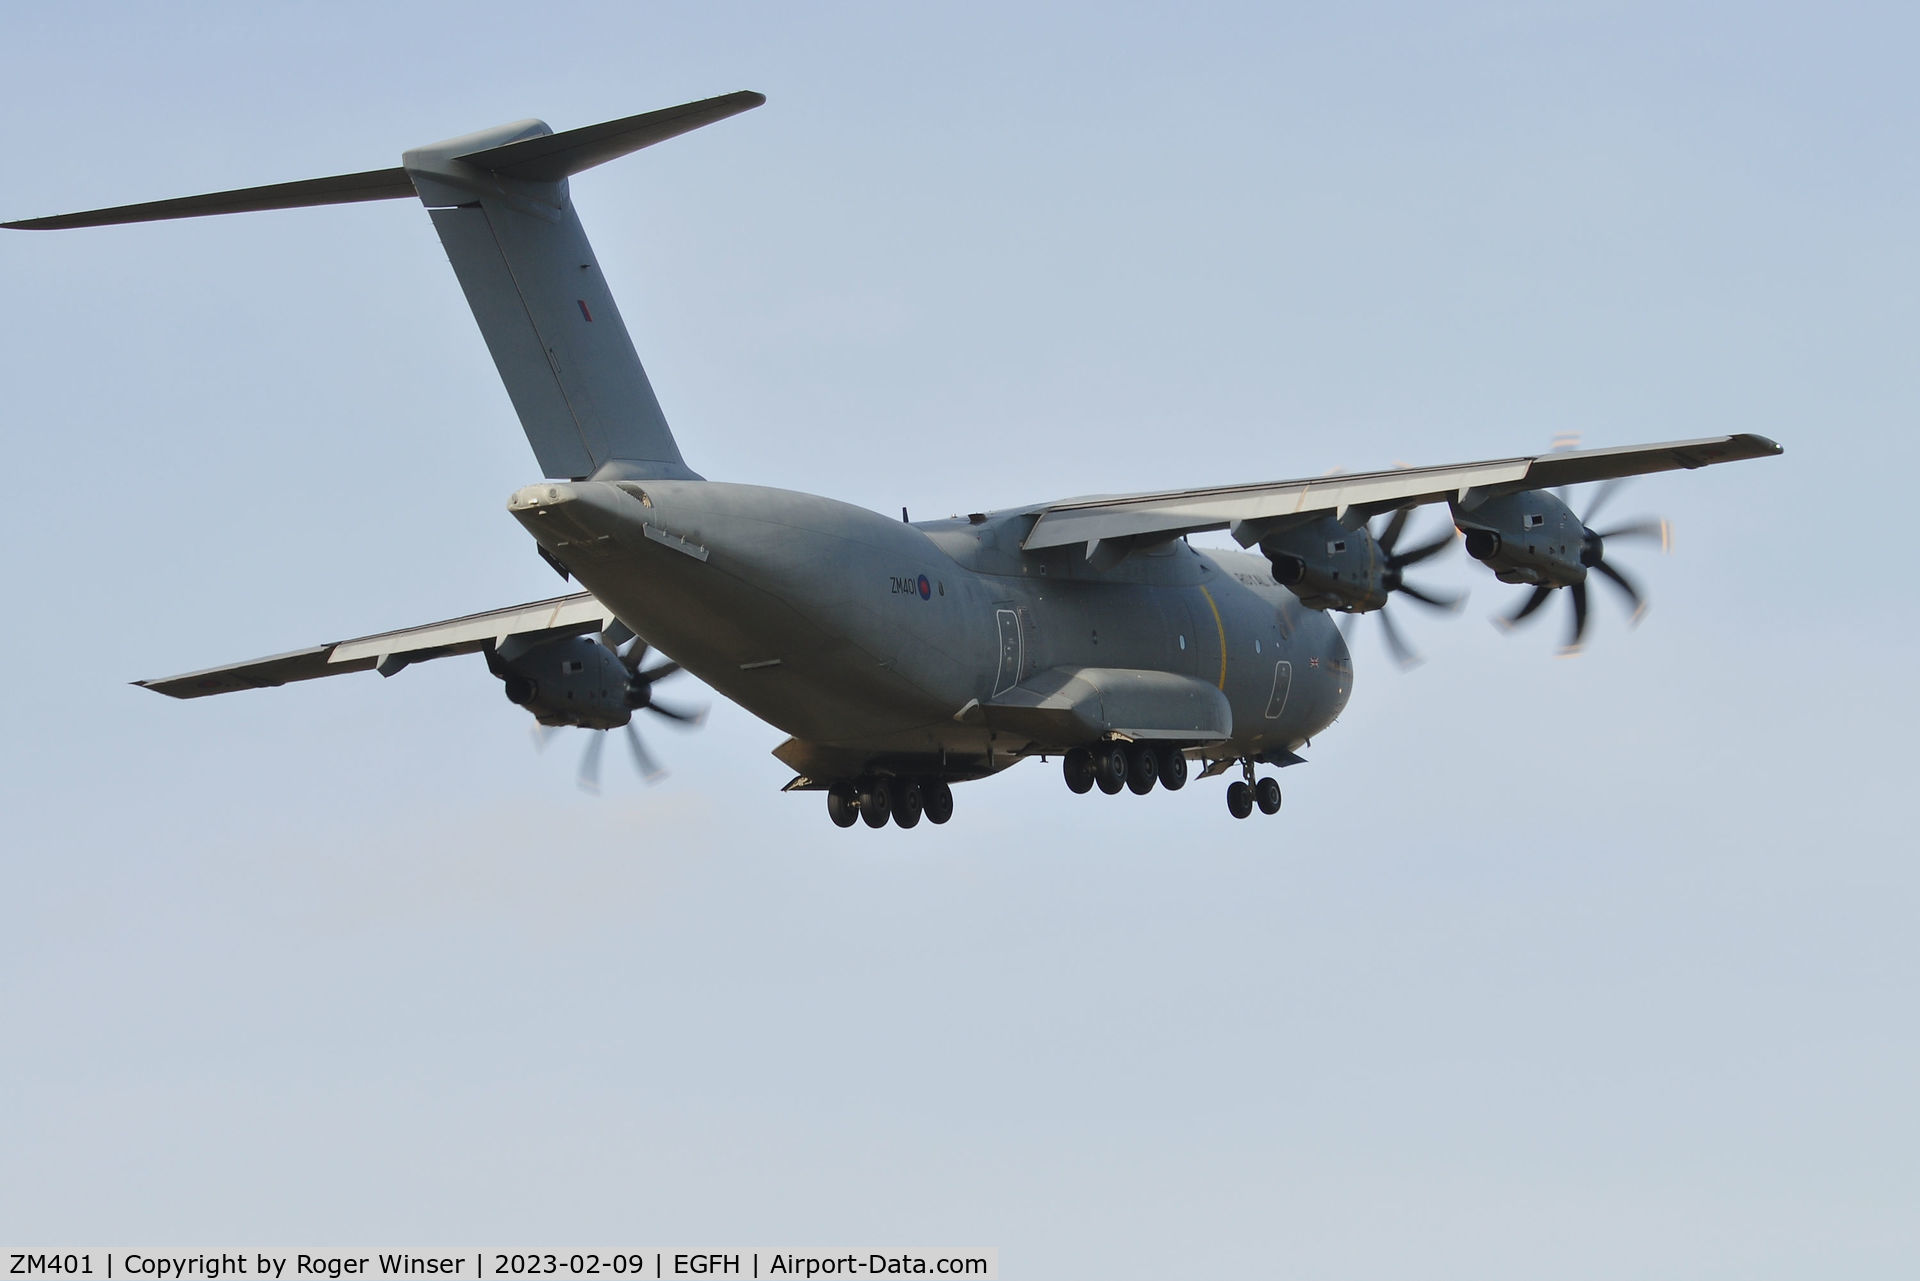 ZM401, 2014 Airbus A400M-180 Atlas C.1 C/N 016, RAF Atlas C.1 aircraft coded 401 of the Brize Norton Transport Wing.